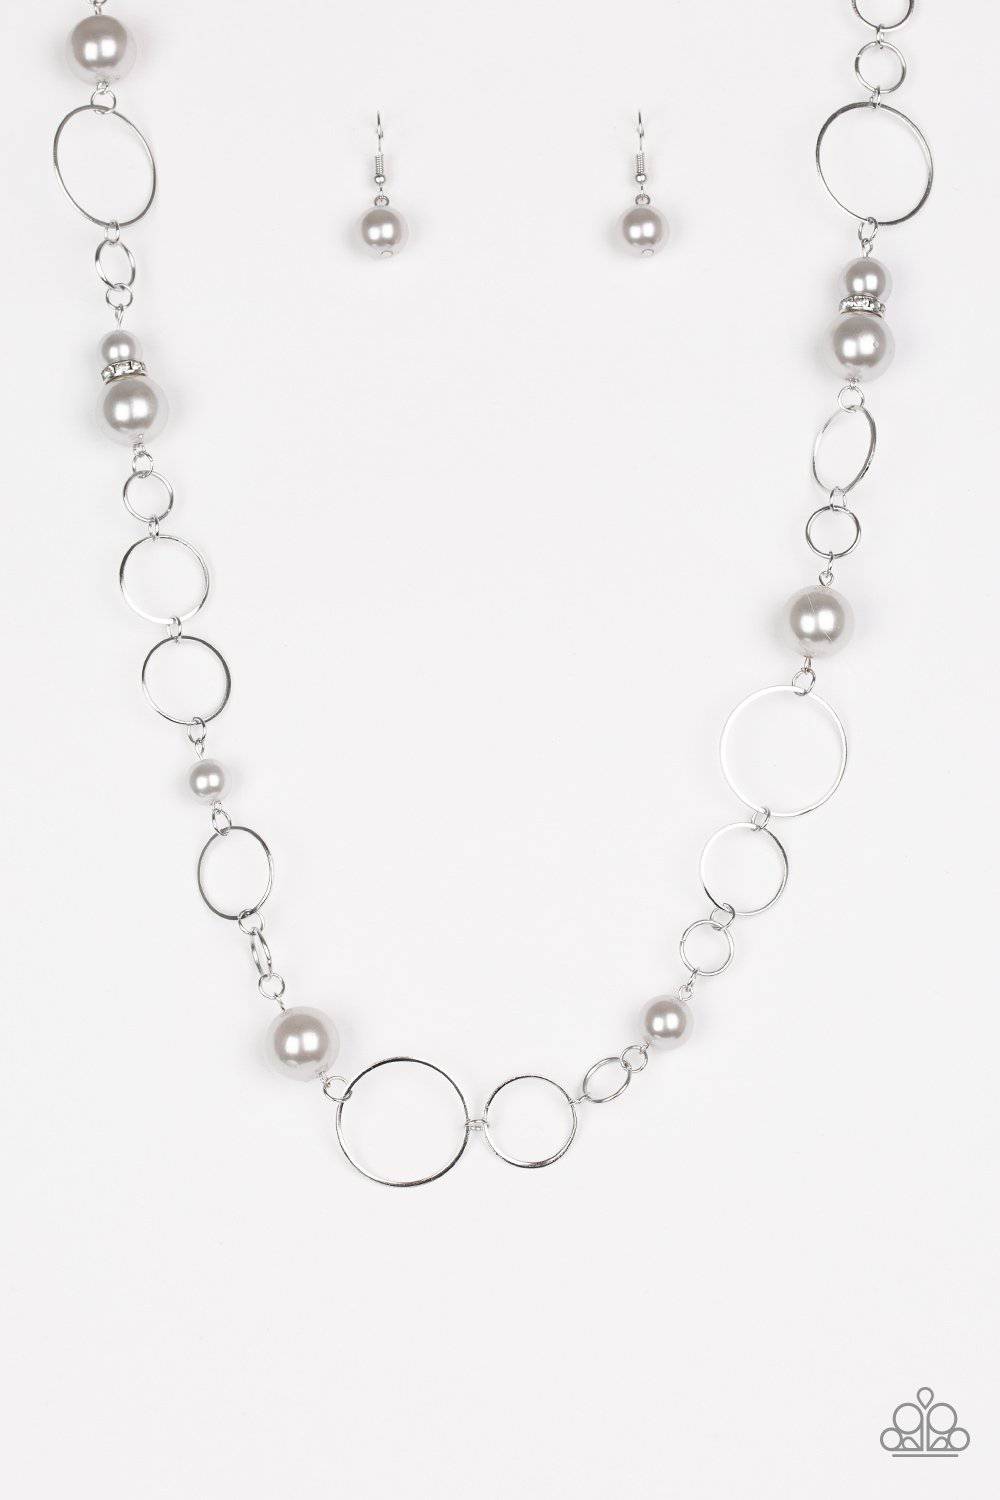 Lovely Lady Luck Silver Necklace - Paparazzi Accessories - GlaMarous Titi Jewels